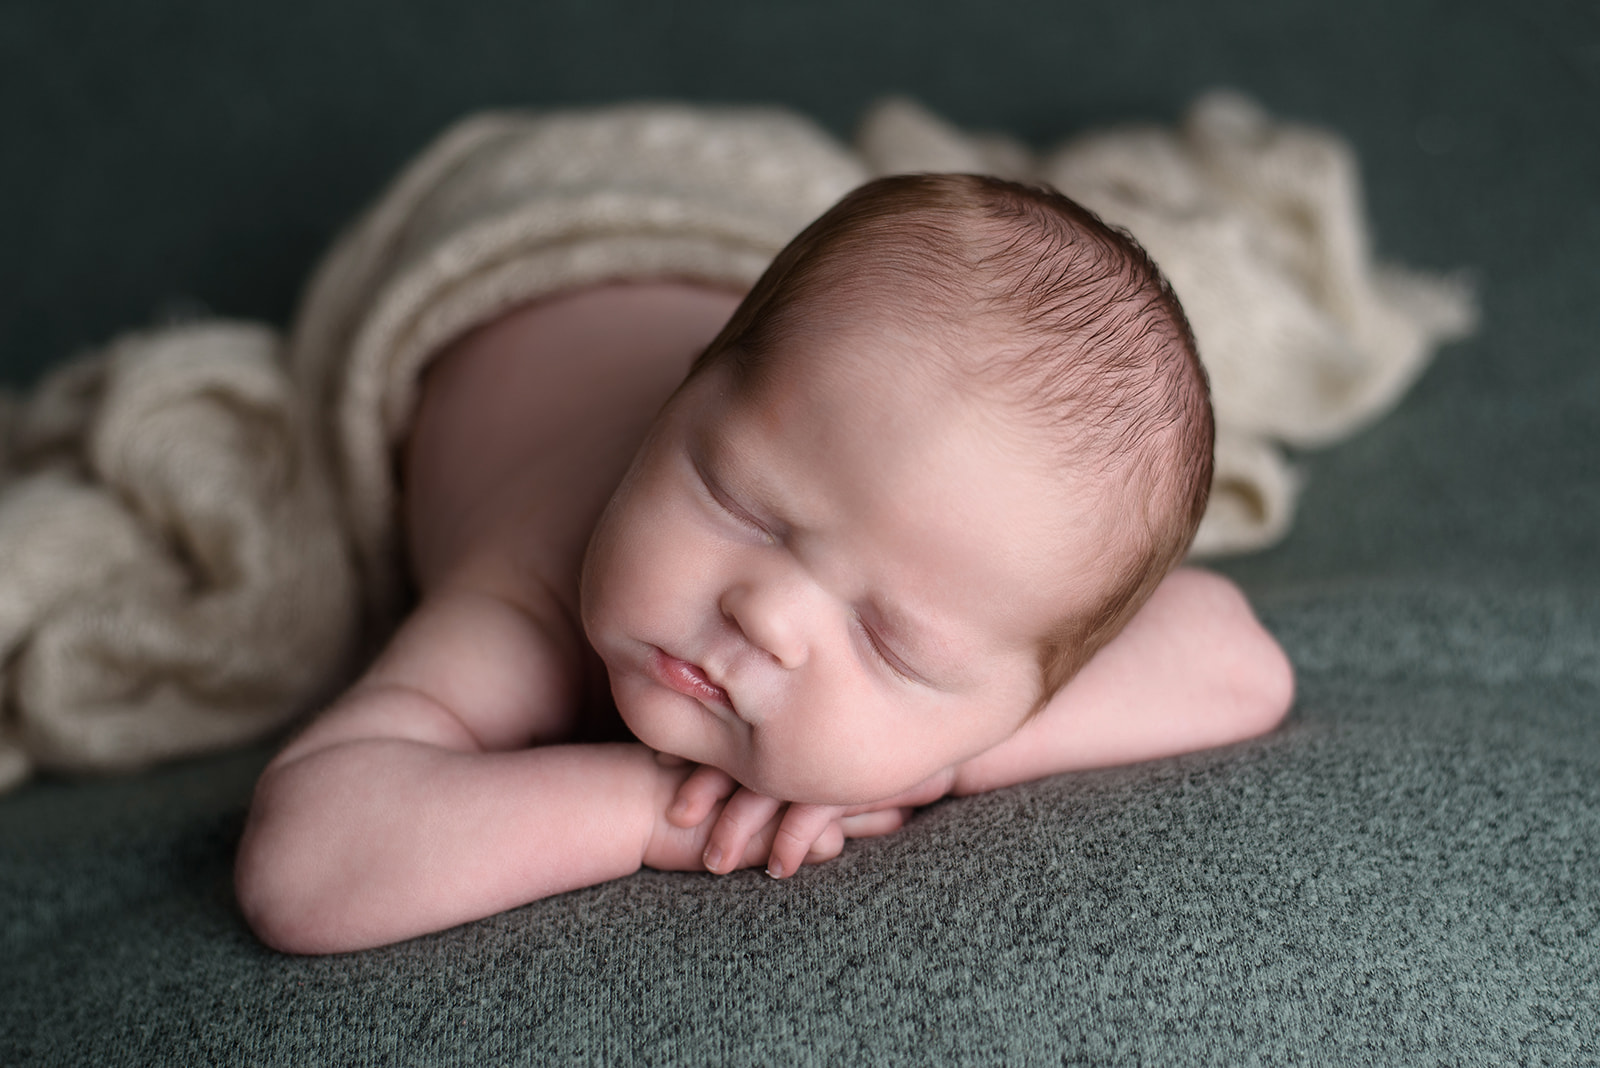 A newborn baby rests on his hands during his timeless newborn photography session